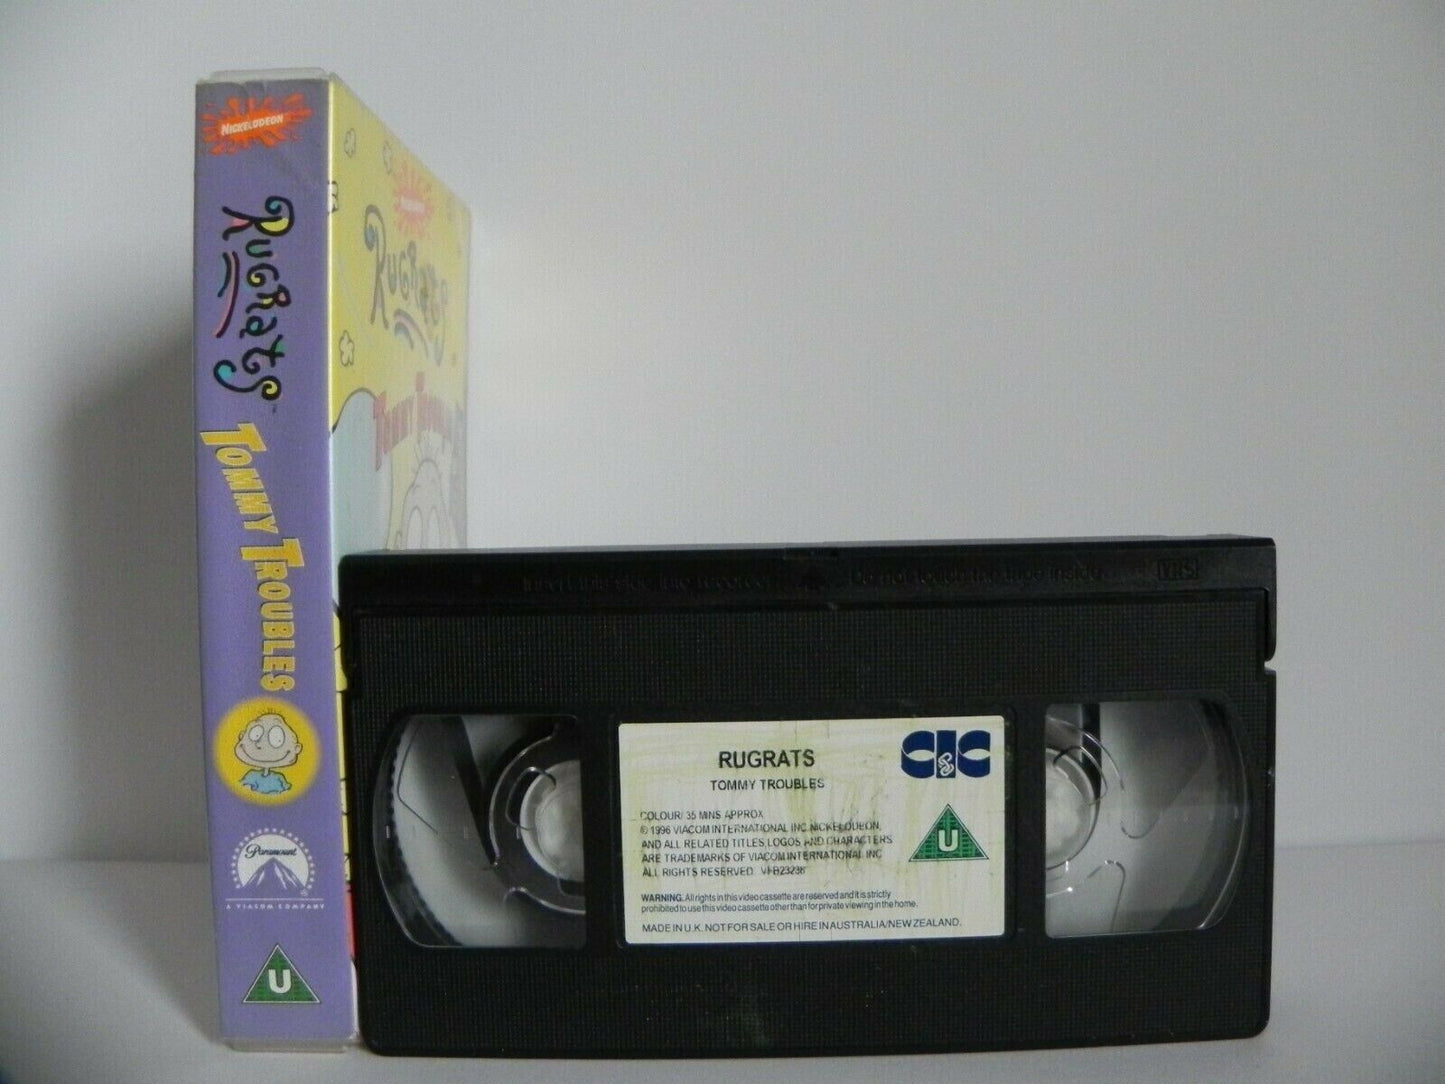 Rugrats: Tommy Troubles - 3 Big Cartoons - Animated Adventures - Kids - Pal VHS-